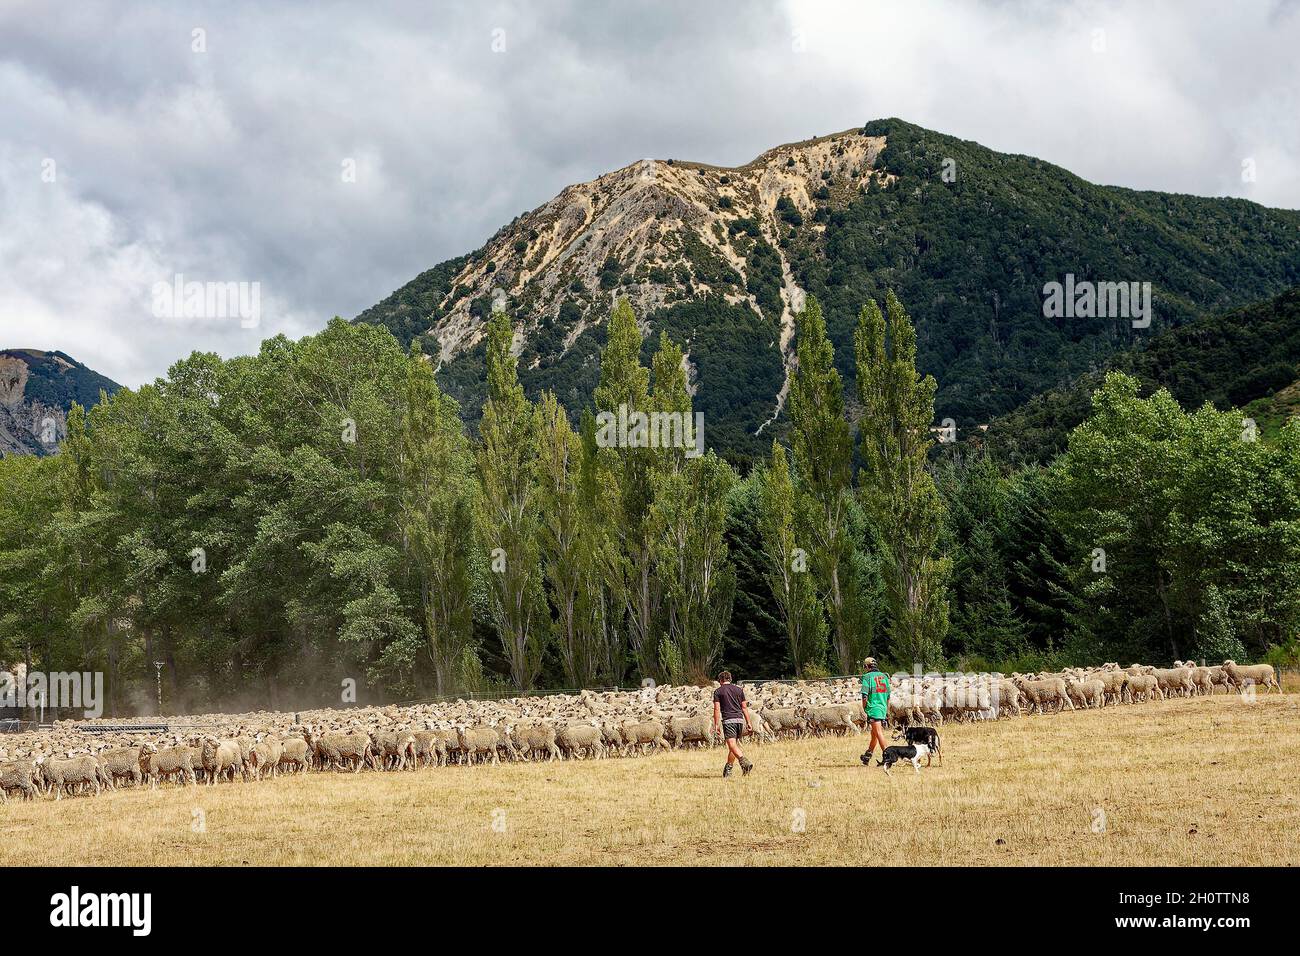 sheep, herded, 2 dogs, 2 men, dusty air, motion, sheep station, mountains, animals, business, wool, South Island, New Zealand, PR Stock Photo